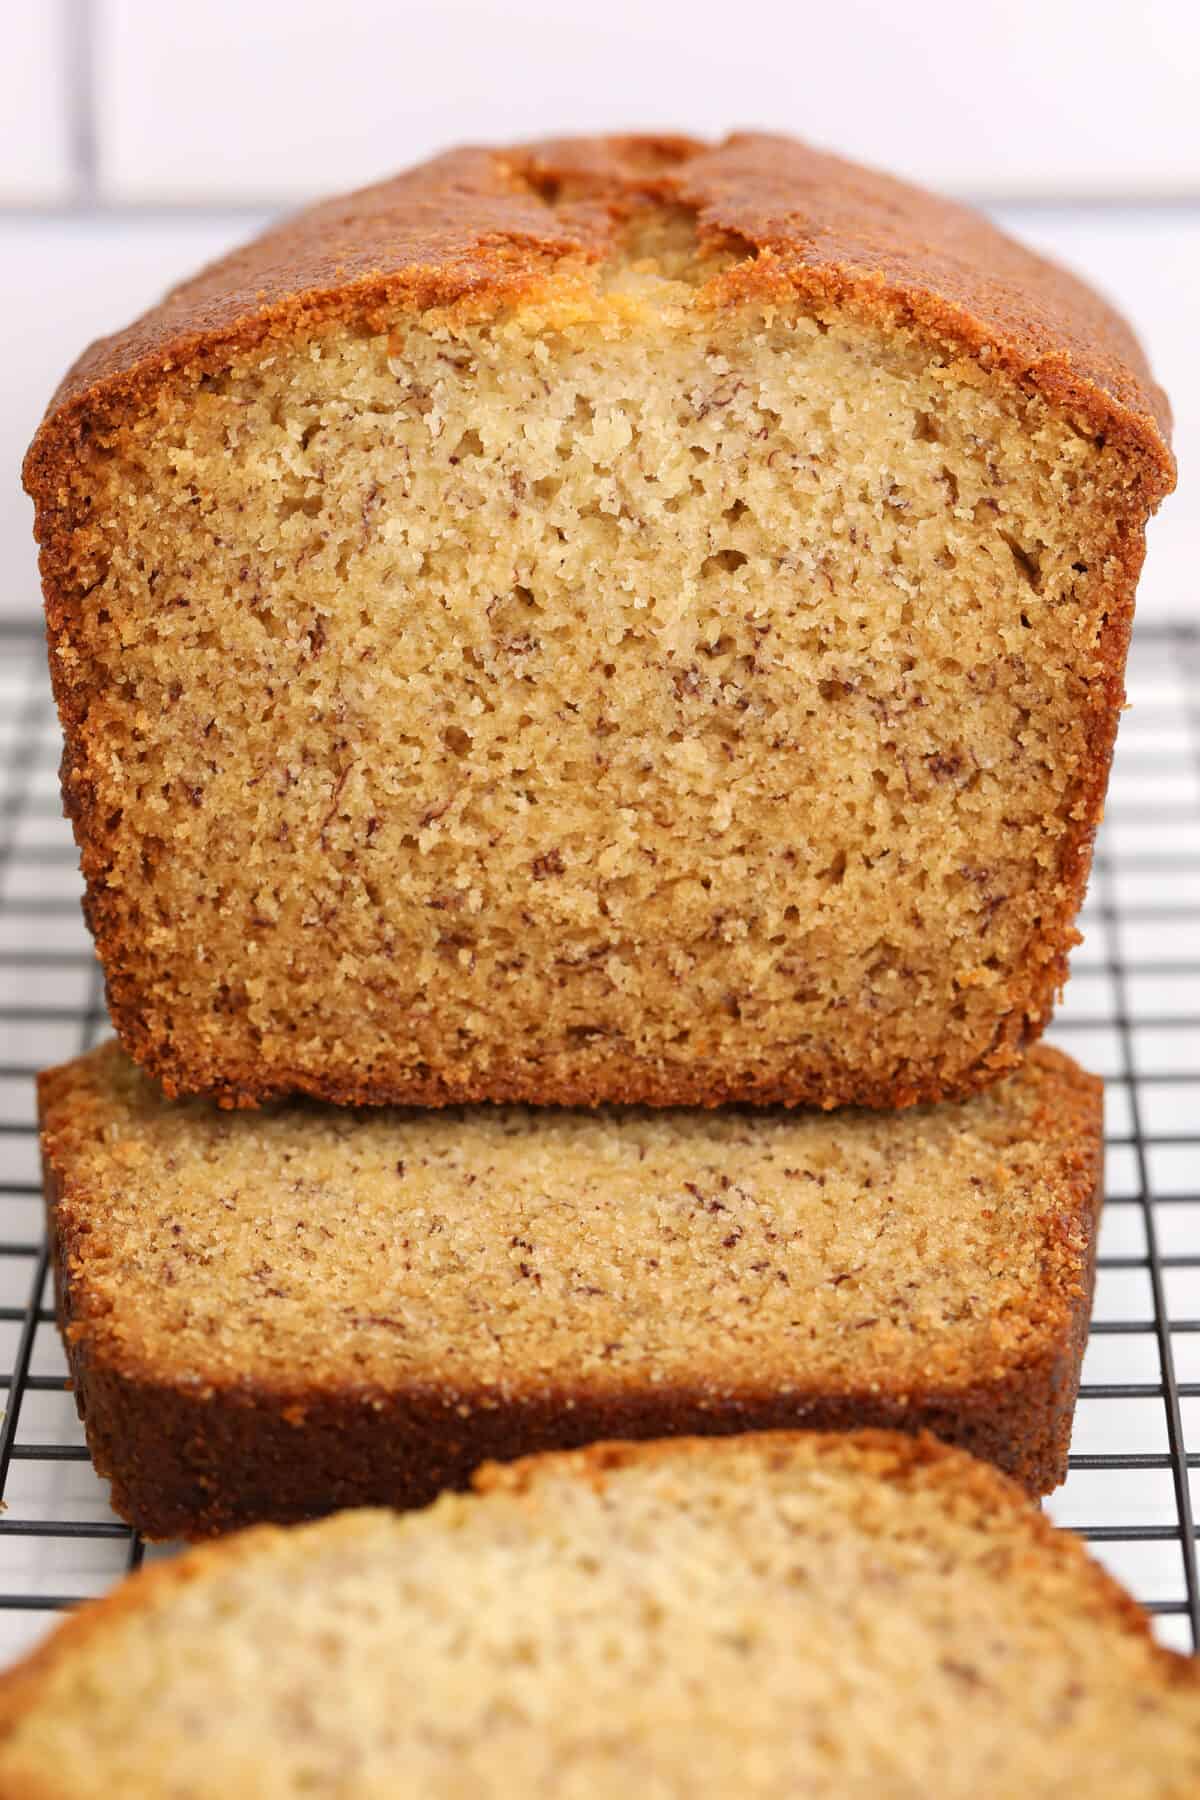 Buttermilk Banana Bread loaf sliced looking at the end of the loaf